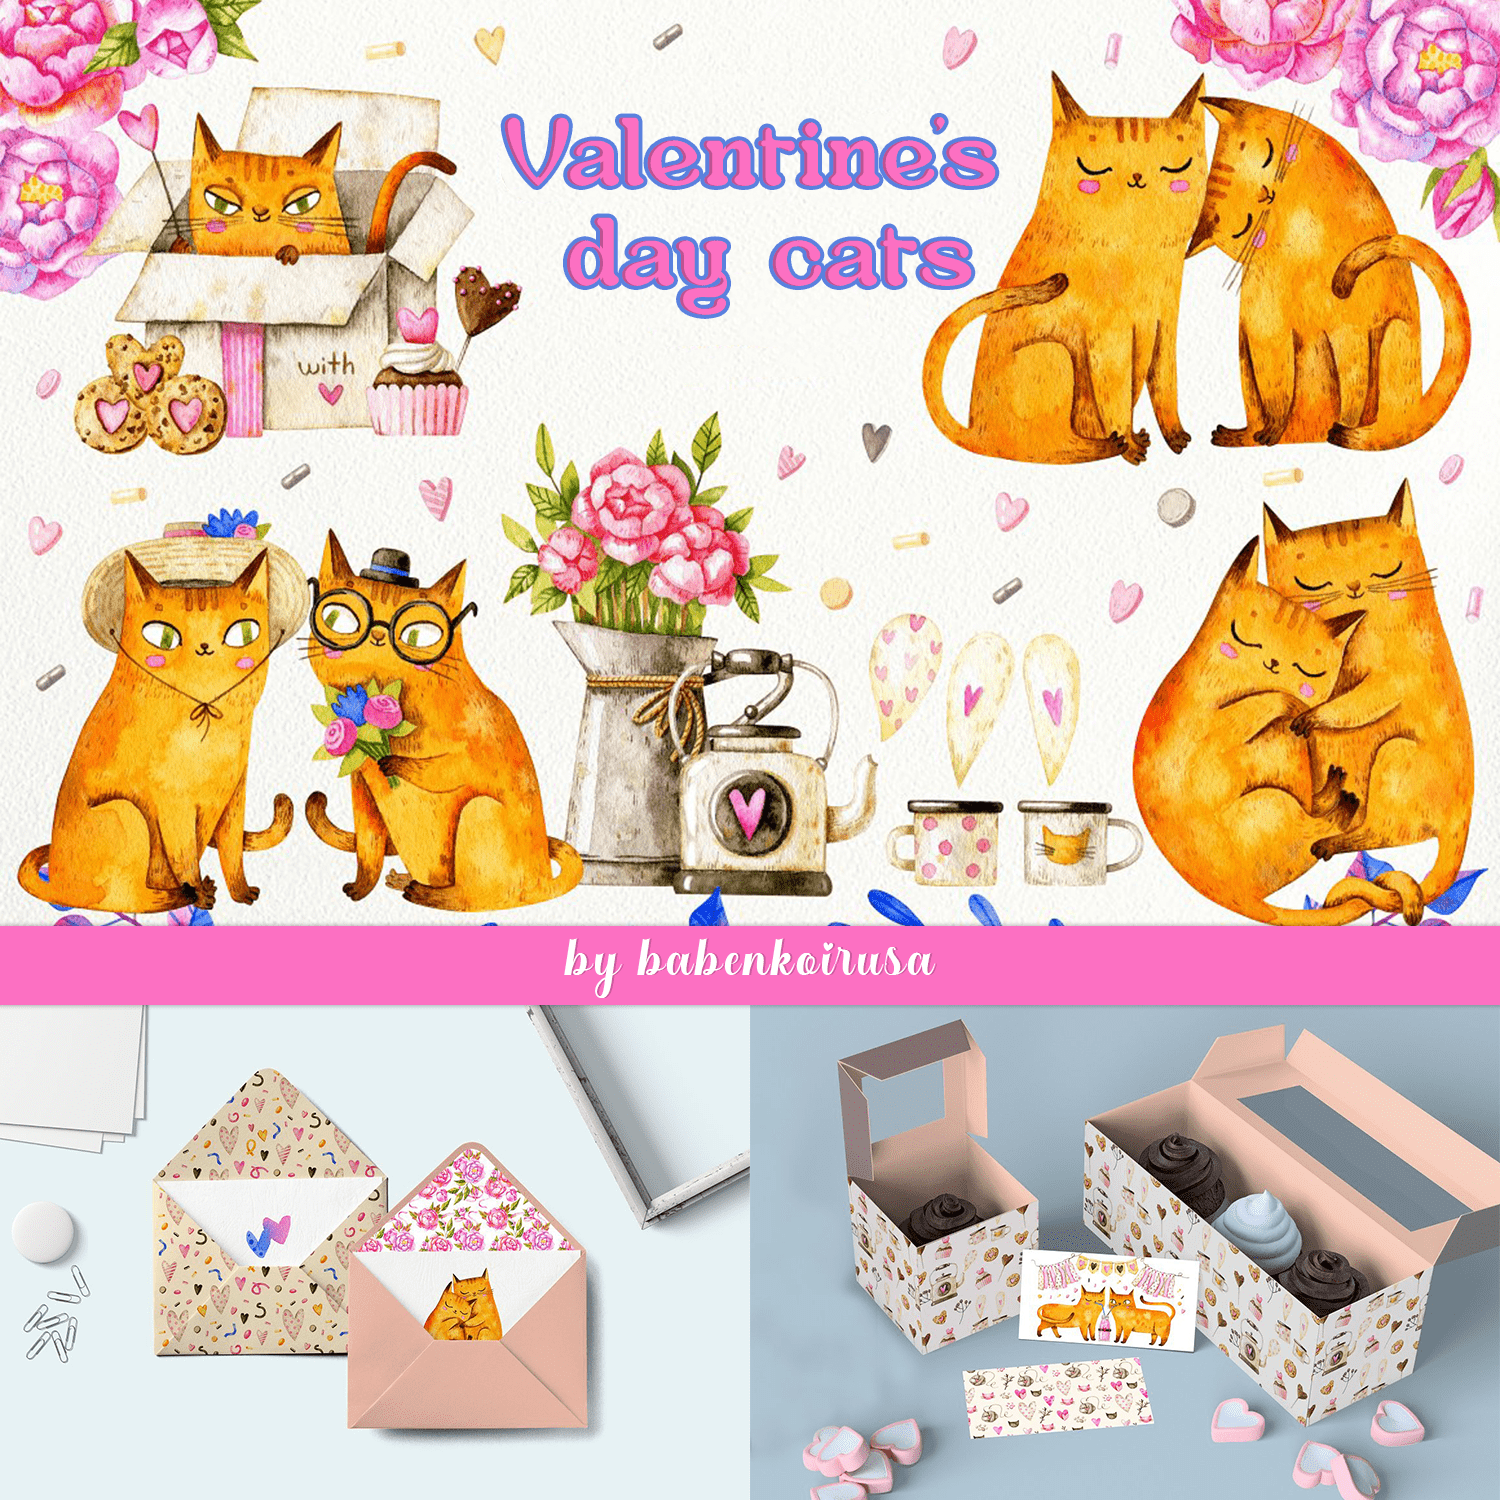 Valentine's day cats - main image preview.